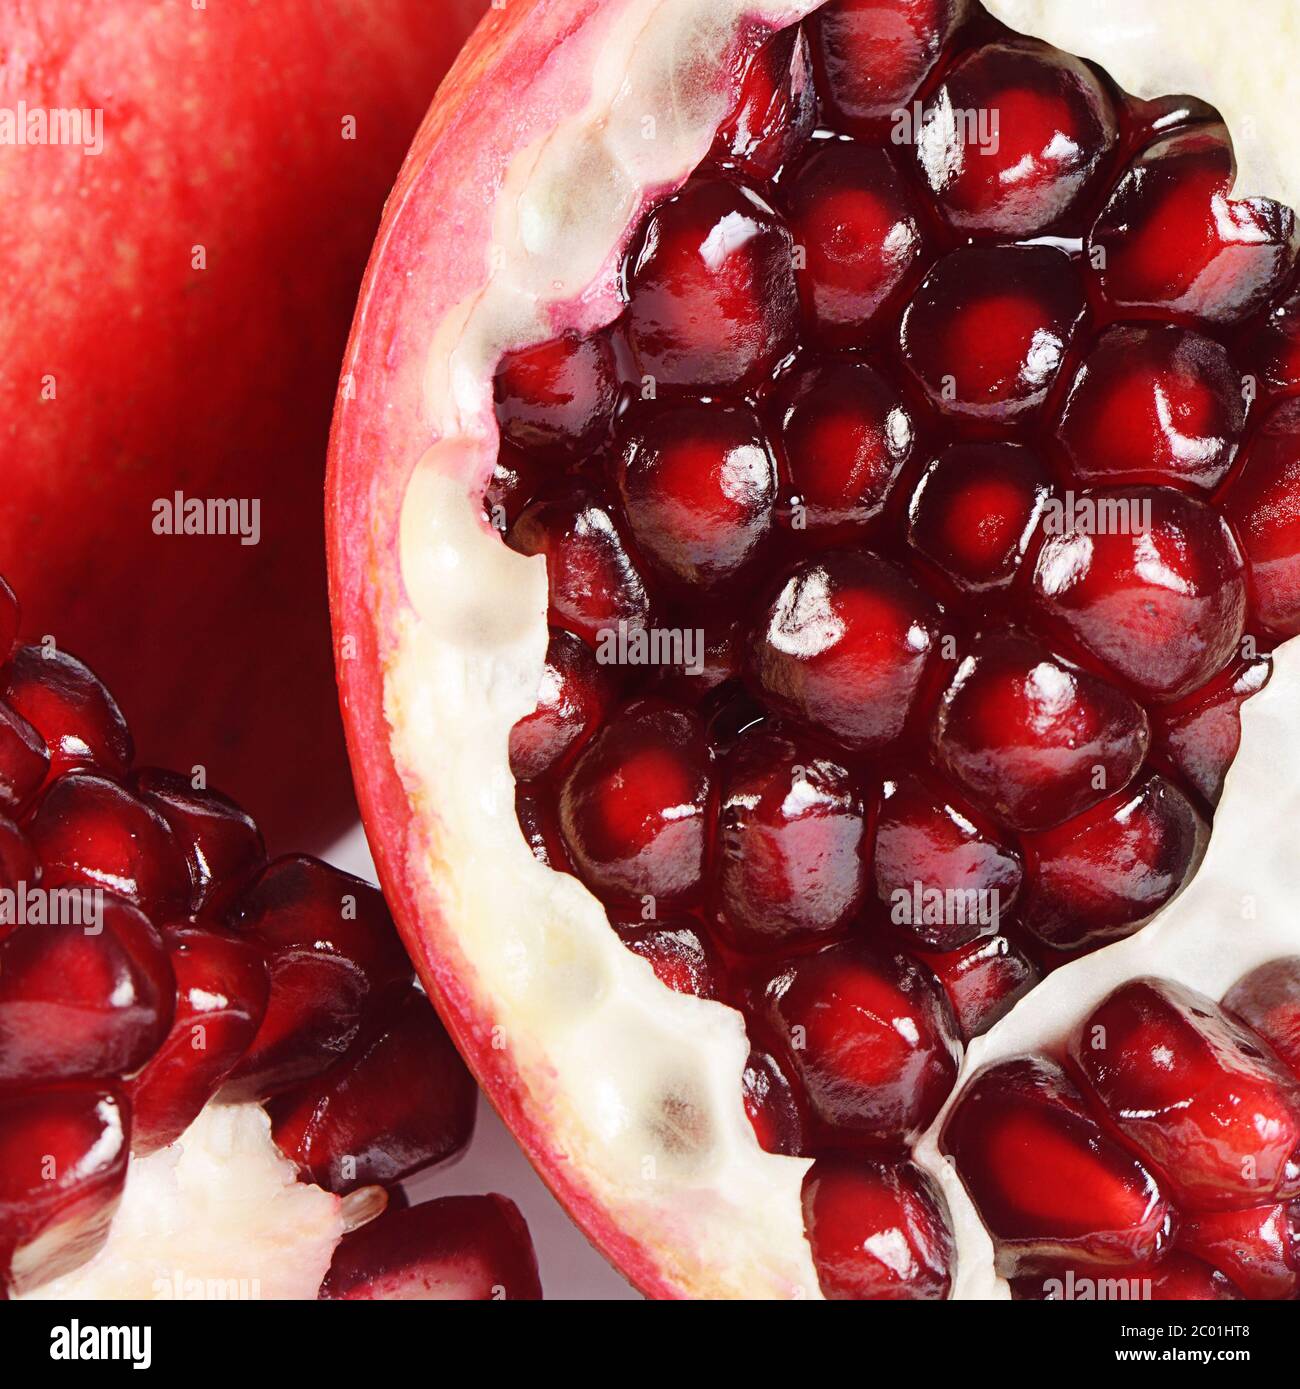 The fresh pomegranate as a background Stock Photo